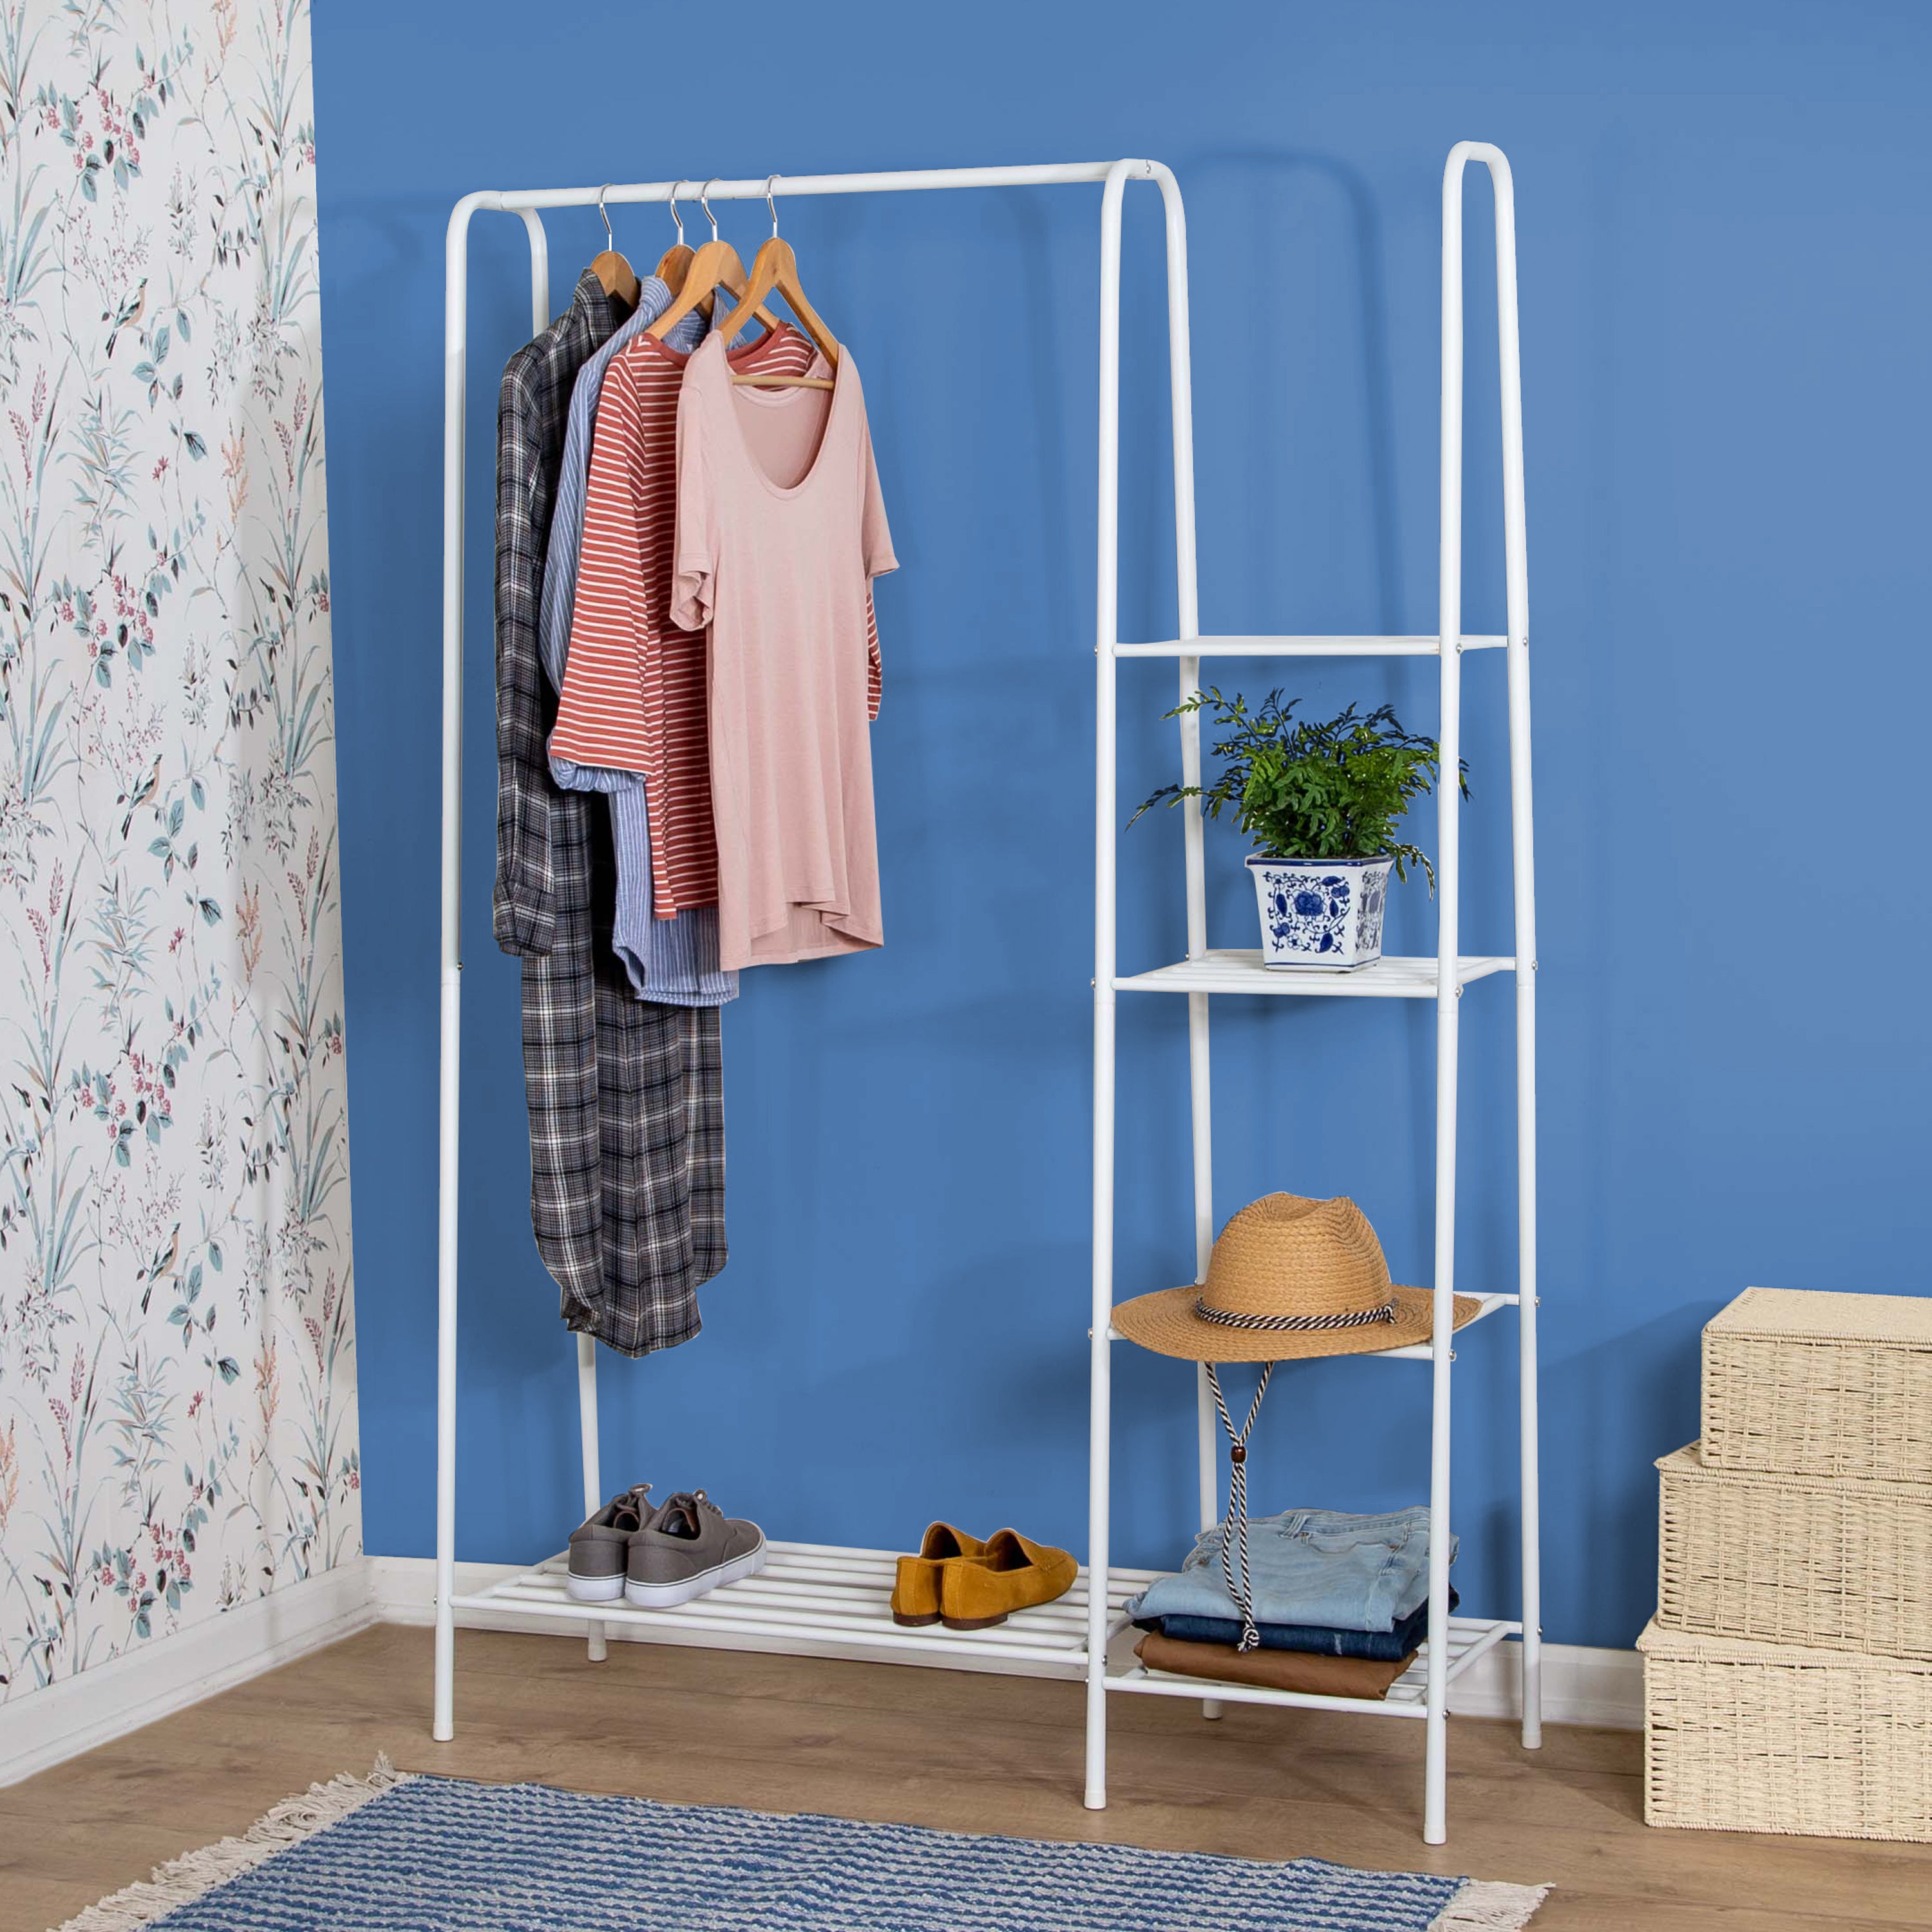 Honey-Can-Do Collapsible Steel X-Frame Freestanding Clothes Drying Rack,  White 